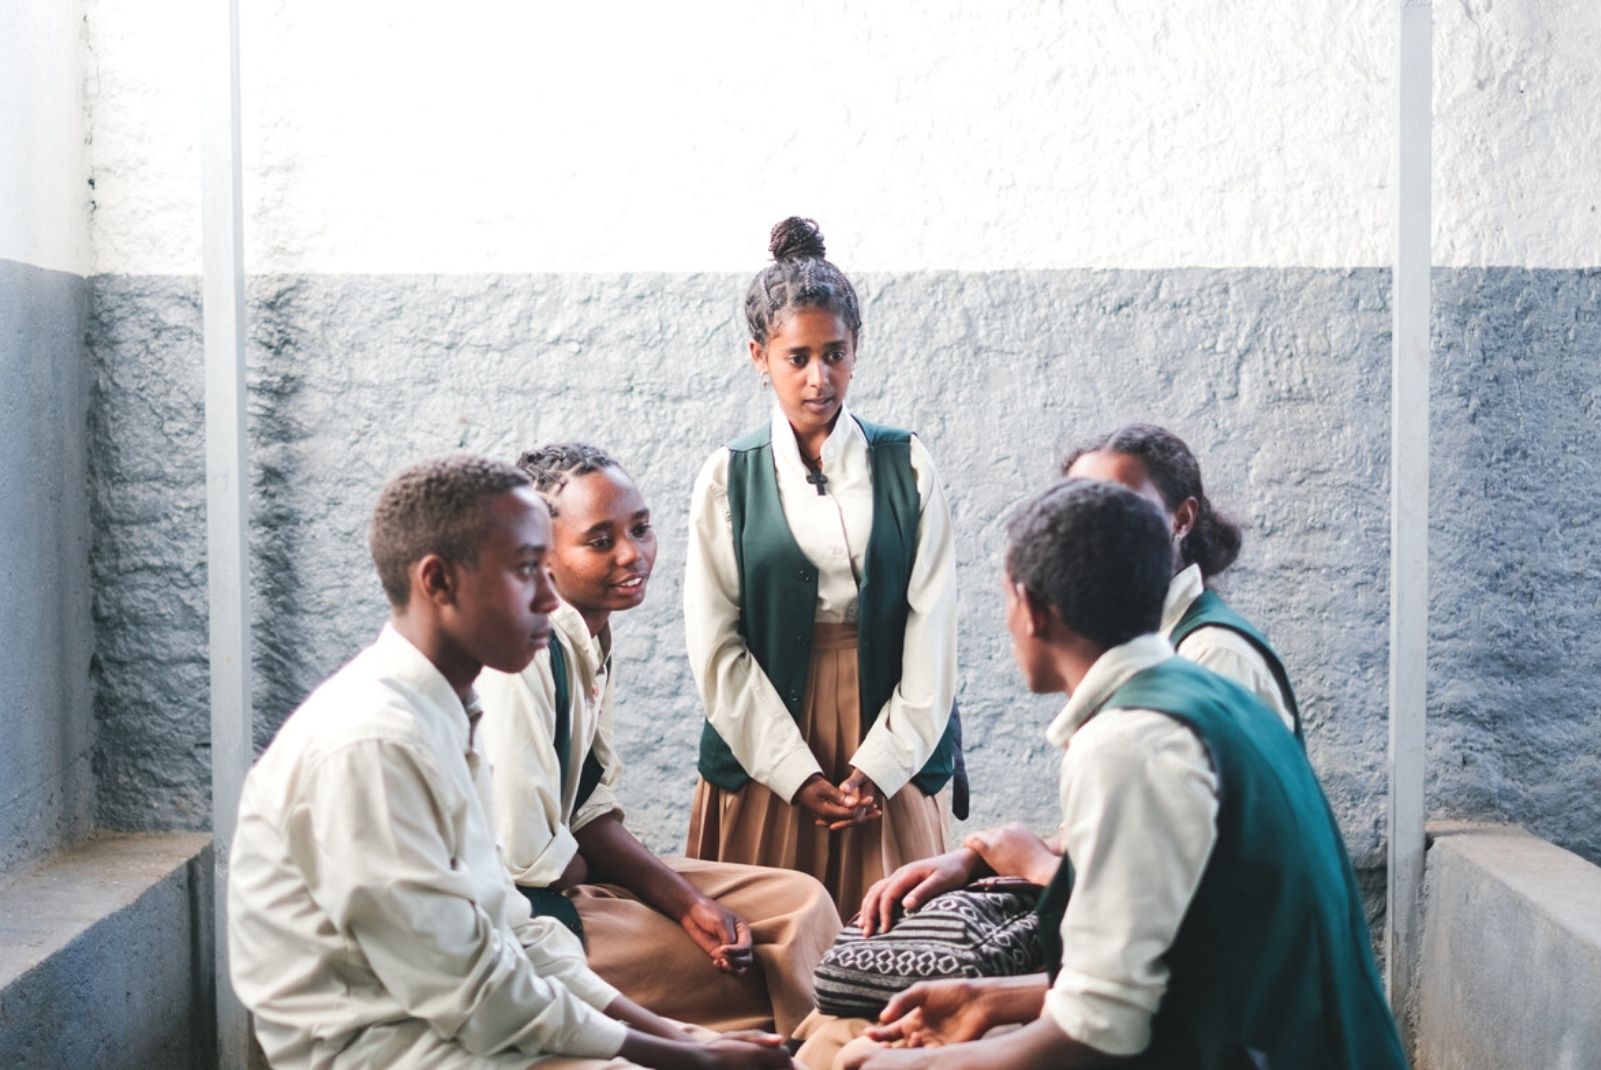 A peer educator in Ethiopia speaks with other young people